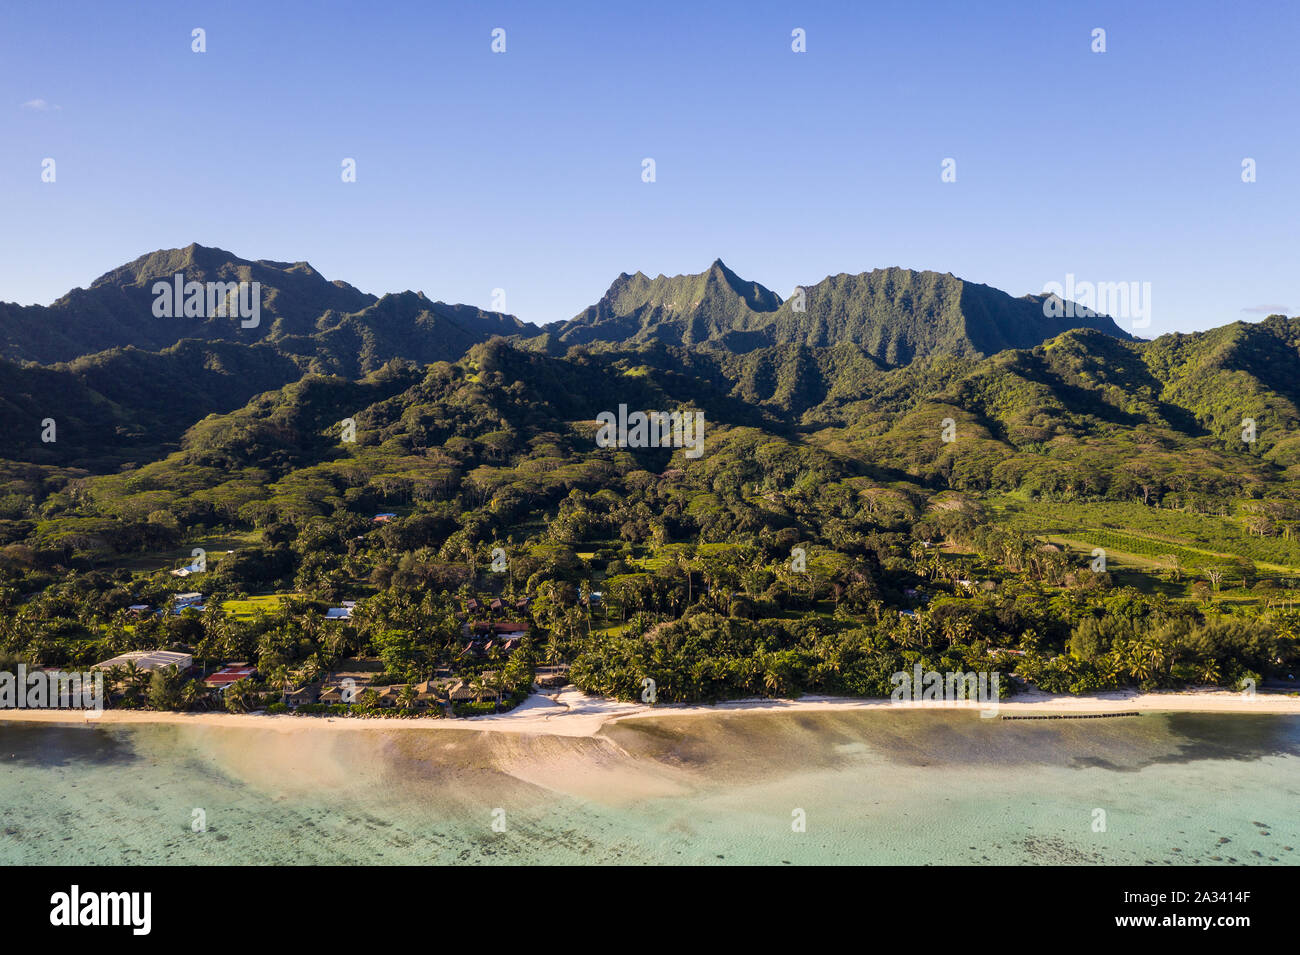 The idyllic Rarotonga island, part of the Cook islands, in the Pacific ocean, with its jungle covered mountain and stunning beach. Stock Photo